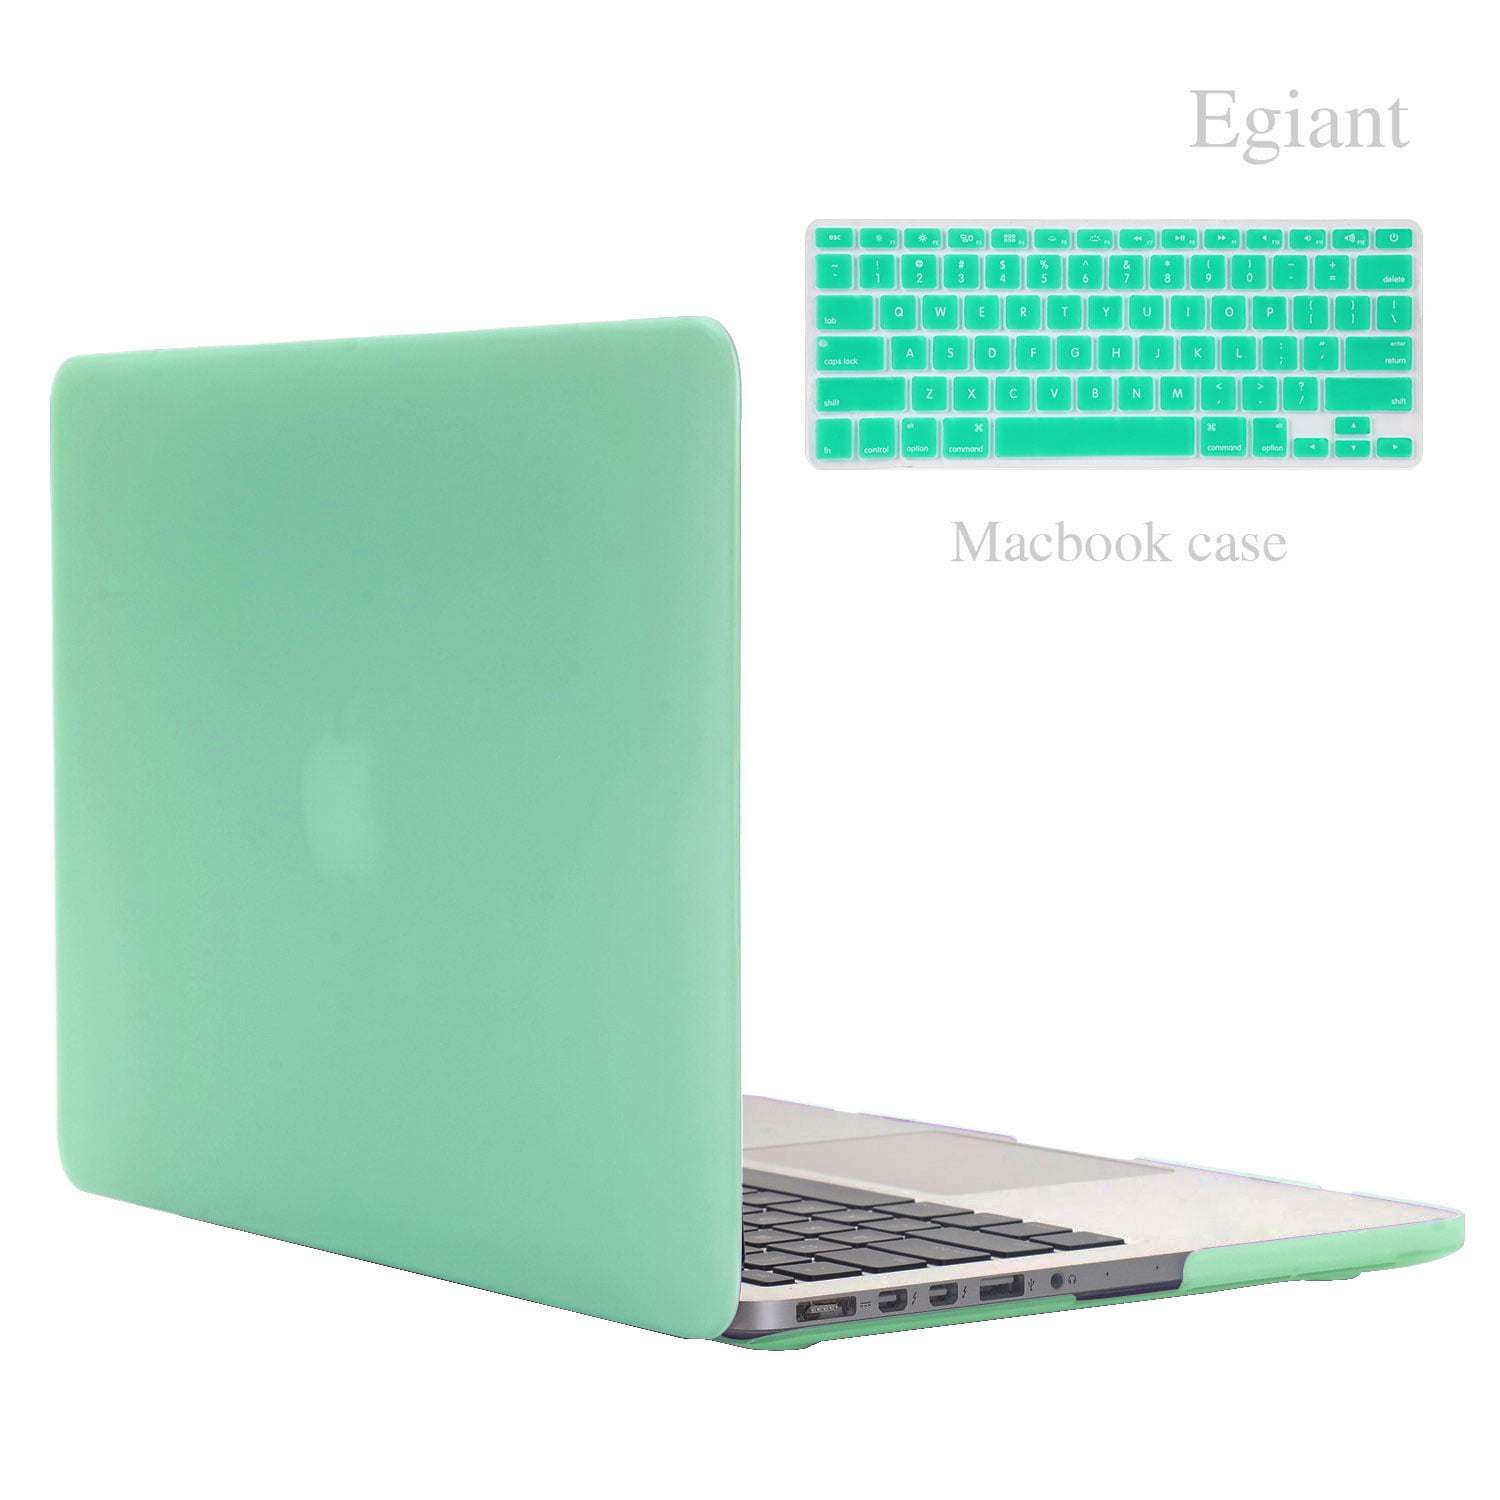 Tifany Blue Keyboard Cover for NEW Macbook Pro 13" A1425 with Retina display 